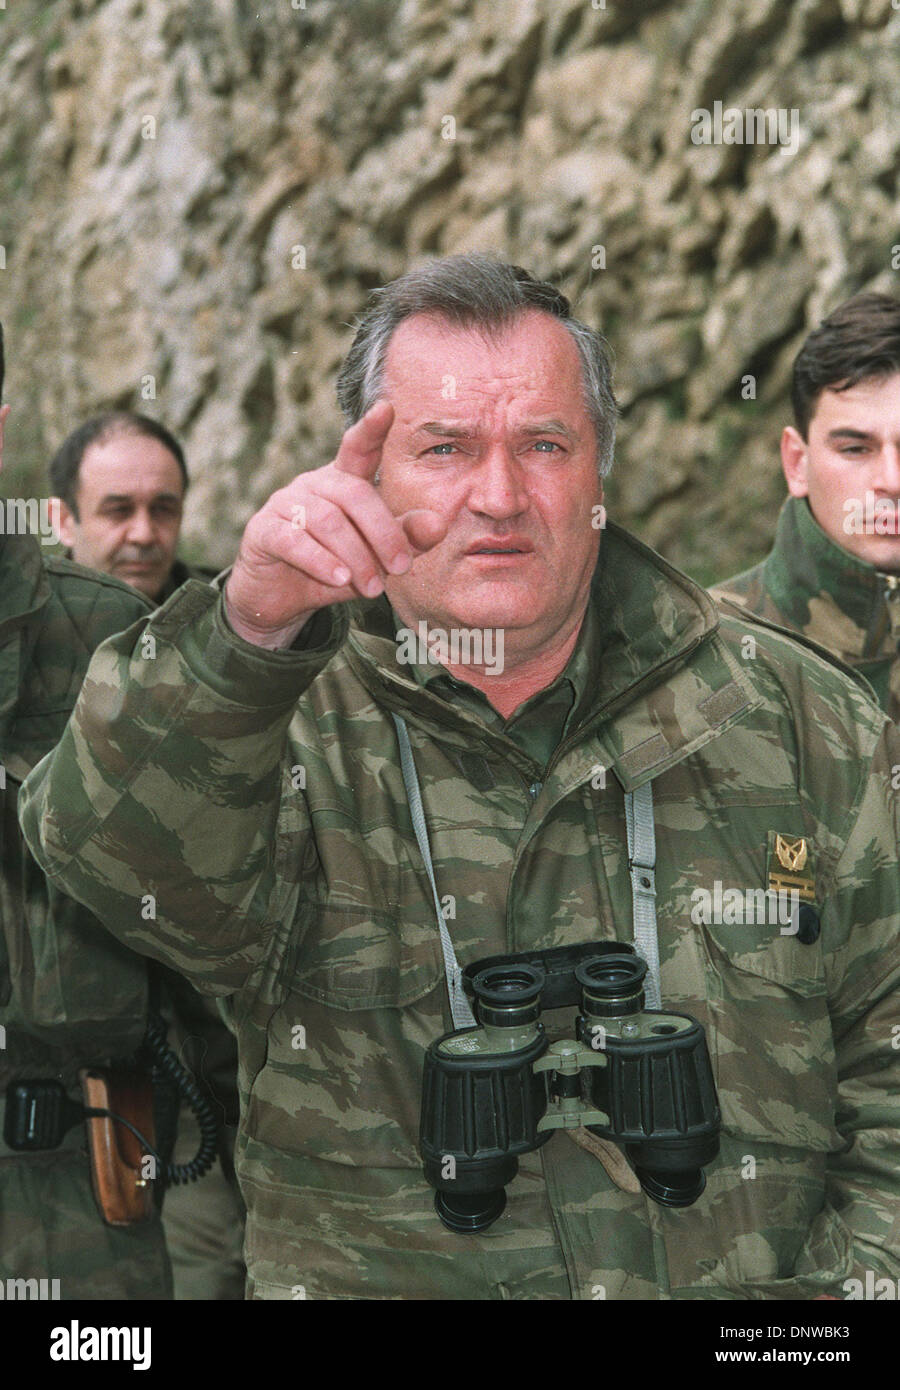 FILE PHOTO - Fugitive Bosnian Serb war crimes suspect RATKO MLADIC has been arrested in Serbia after 16 years on the run. Gen Mladic, 69, was found in the village of Lazarevo in northern Serbia where had been living under an assumed name. He faces charges over the massacre of at least 7,500 Bosnian Muslim men and boys at Srebrenica in 1995.  PICTURED:  Apr 16, 1994 - Gorazde, Bosni Stock Photo